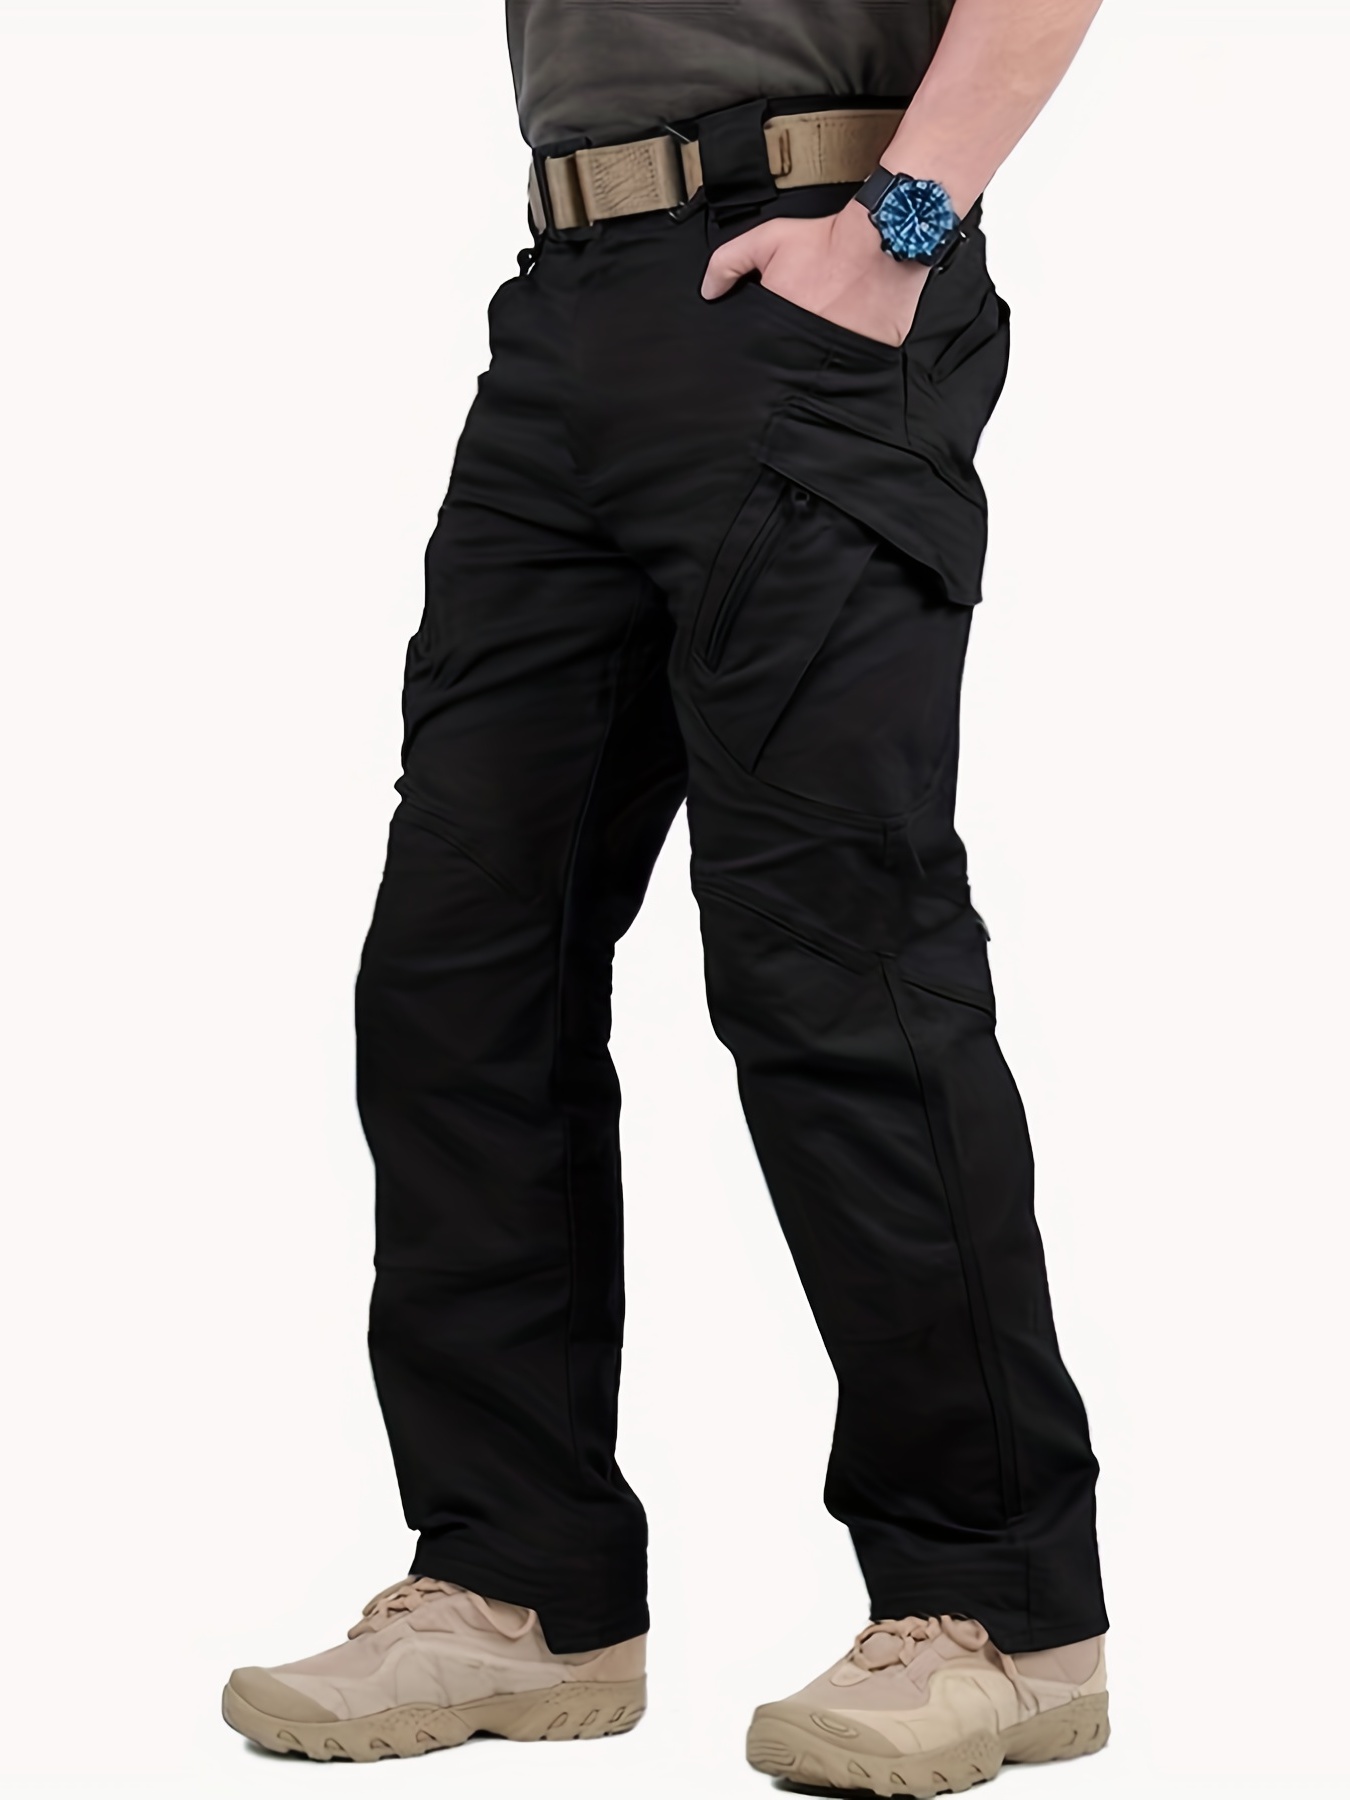 Cheap Men's Military Tactical Pants Combat Military Pants Men Pockets With  Many Pockets Outdoor Waterproof Casual Cargo Pants Tactical Pants